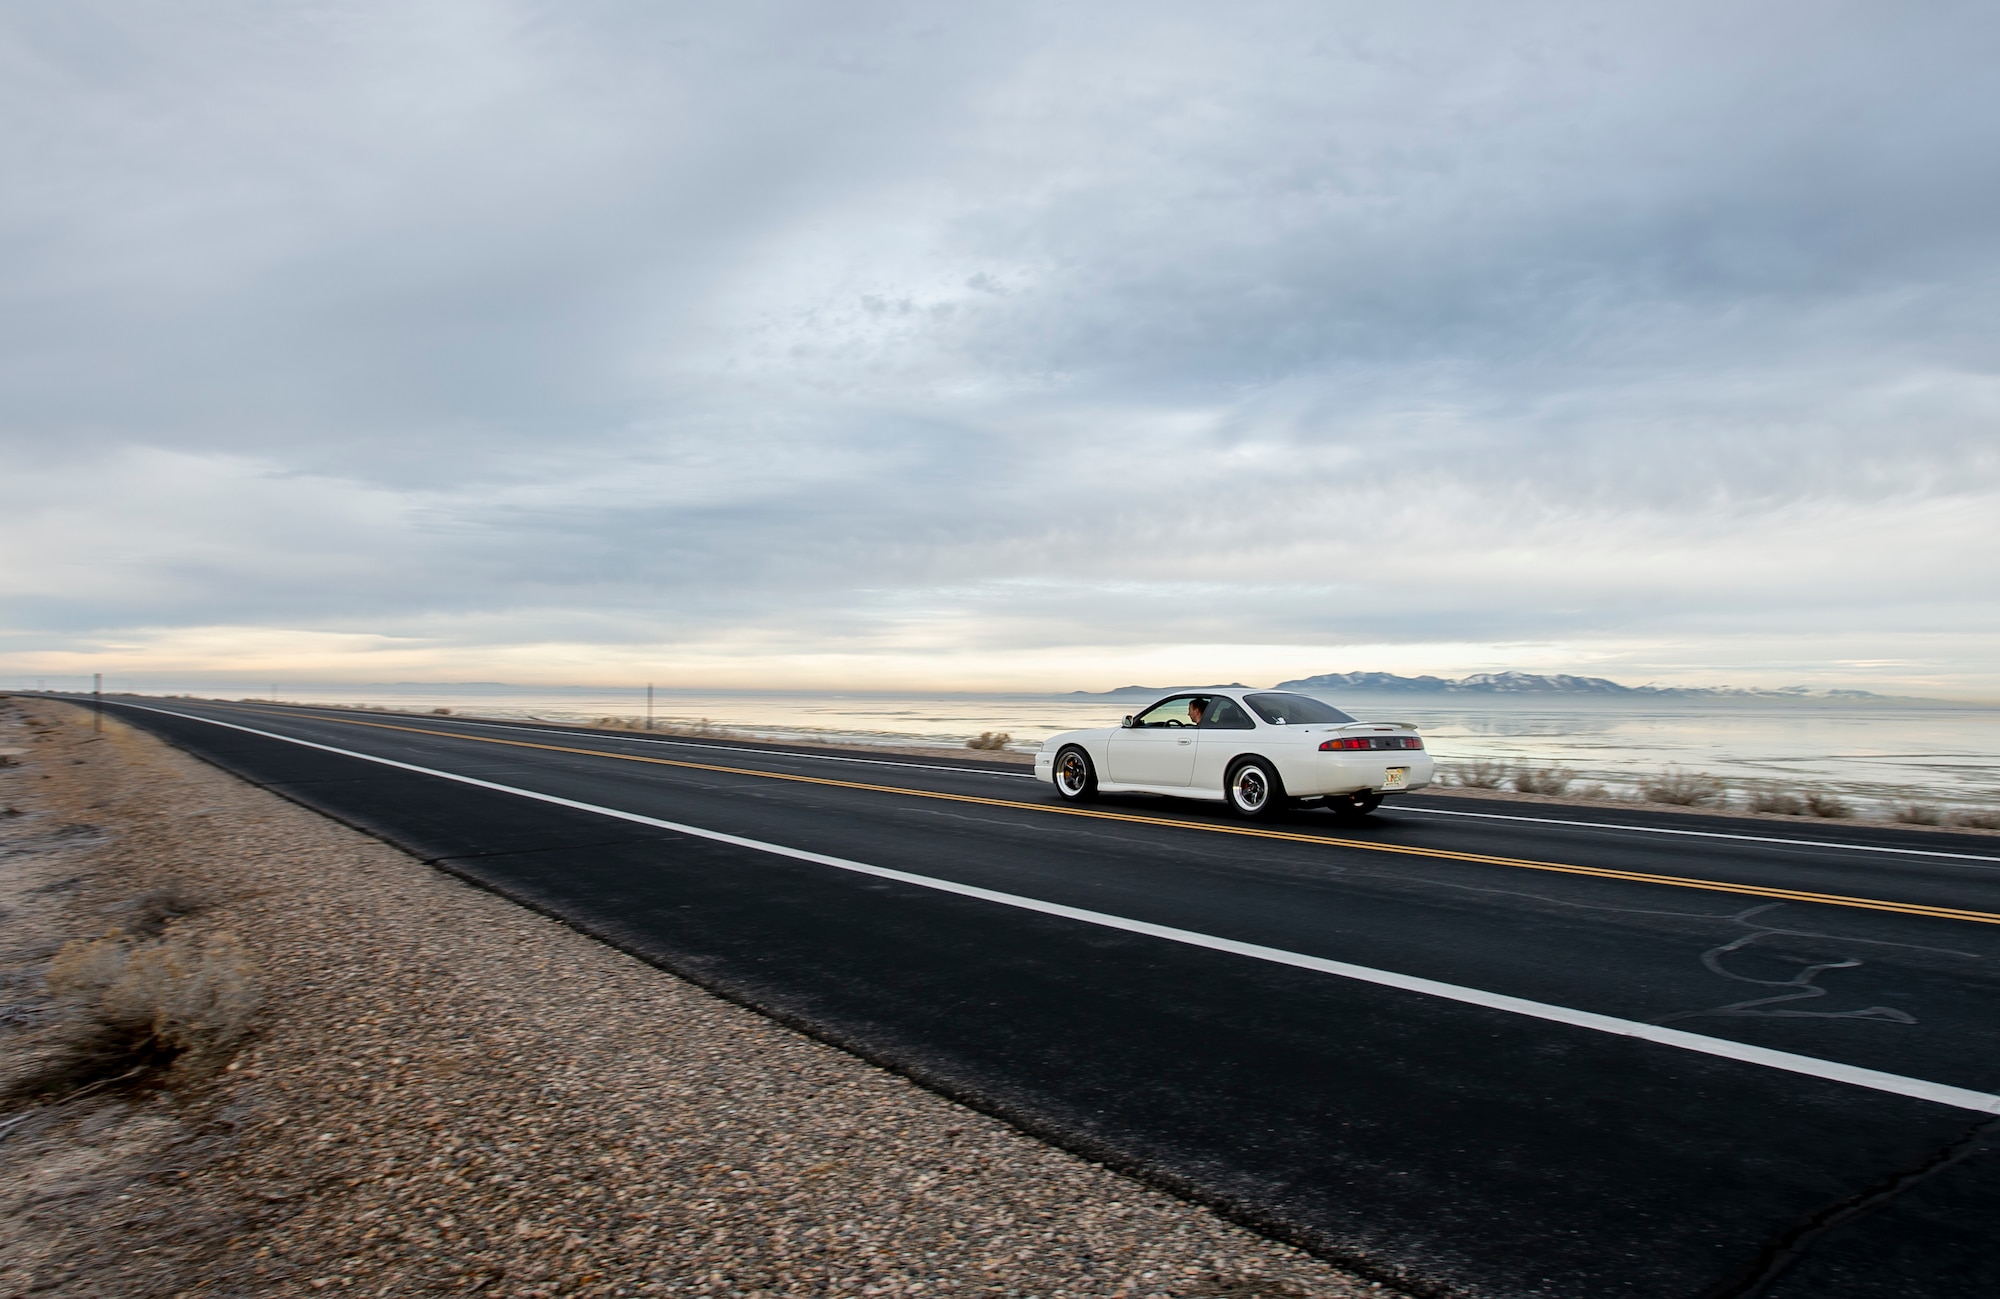 U.S. Air Force Staff Sgt. Brandon Bunn, a 388th Maintenance Group quality assurance inspector and car enthusiast, drives to Antelope Island, Utah, Feb. 2, 2020. On his off-time, Bunn turns wrenches on his 1998 Nissan 240SX drag car. He uses the car as a learning opportunity to teach his daughters about cars and carry on the family hobby. (U.S. Air Force photo by Staff Sgt. Jarrod M. Vickers)